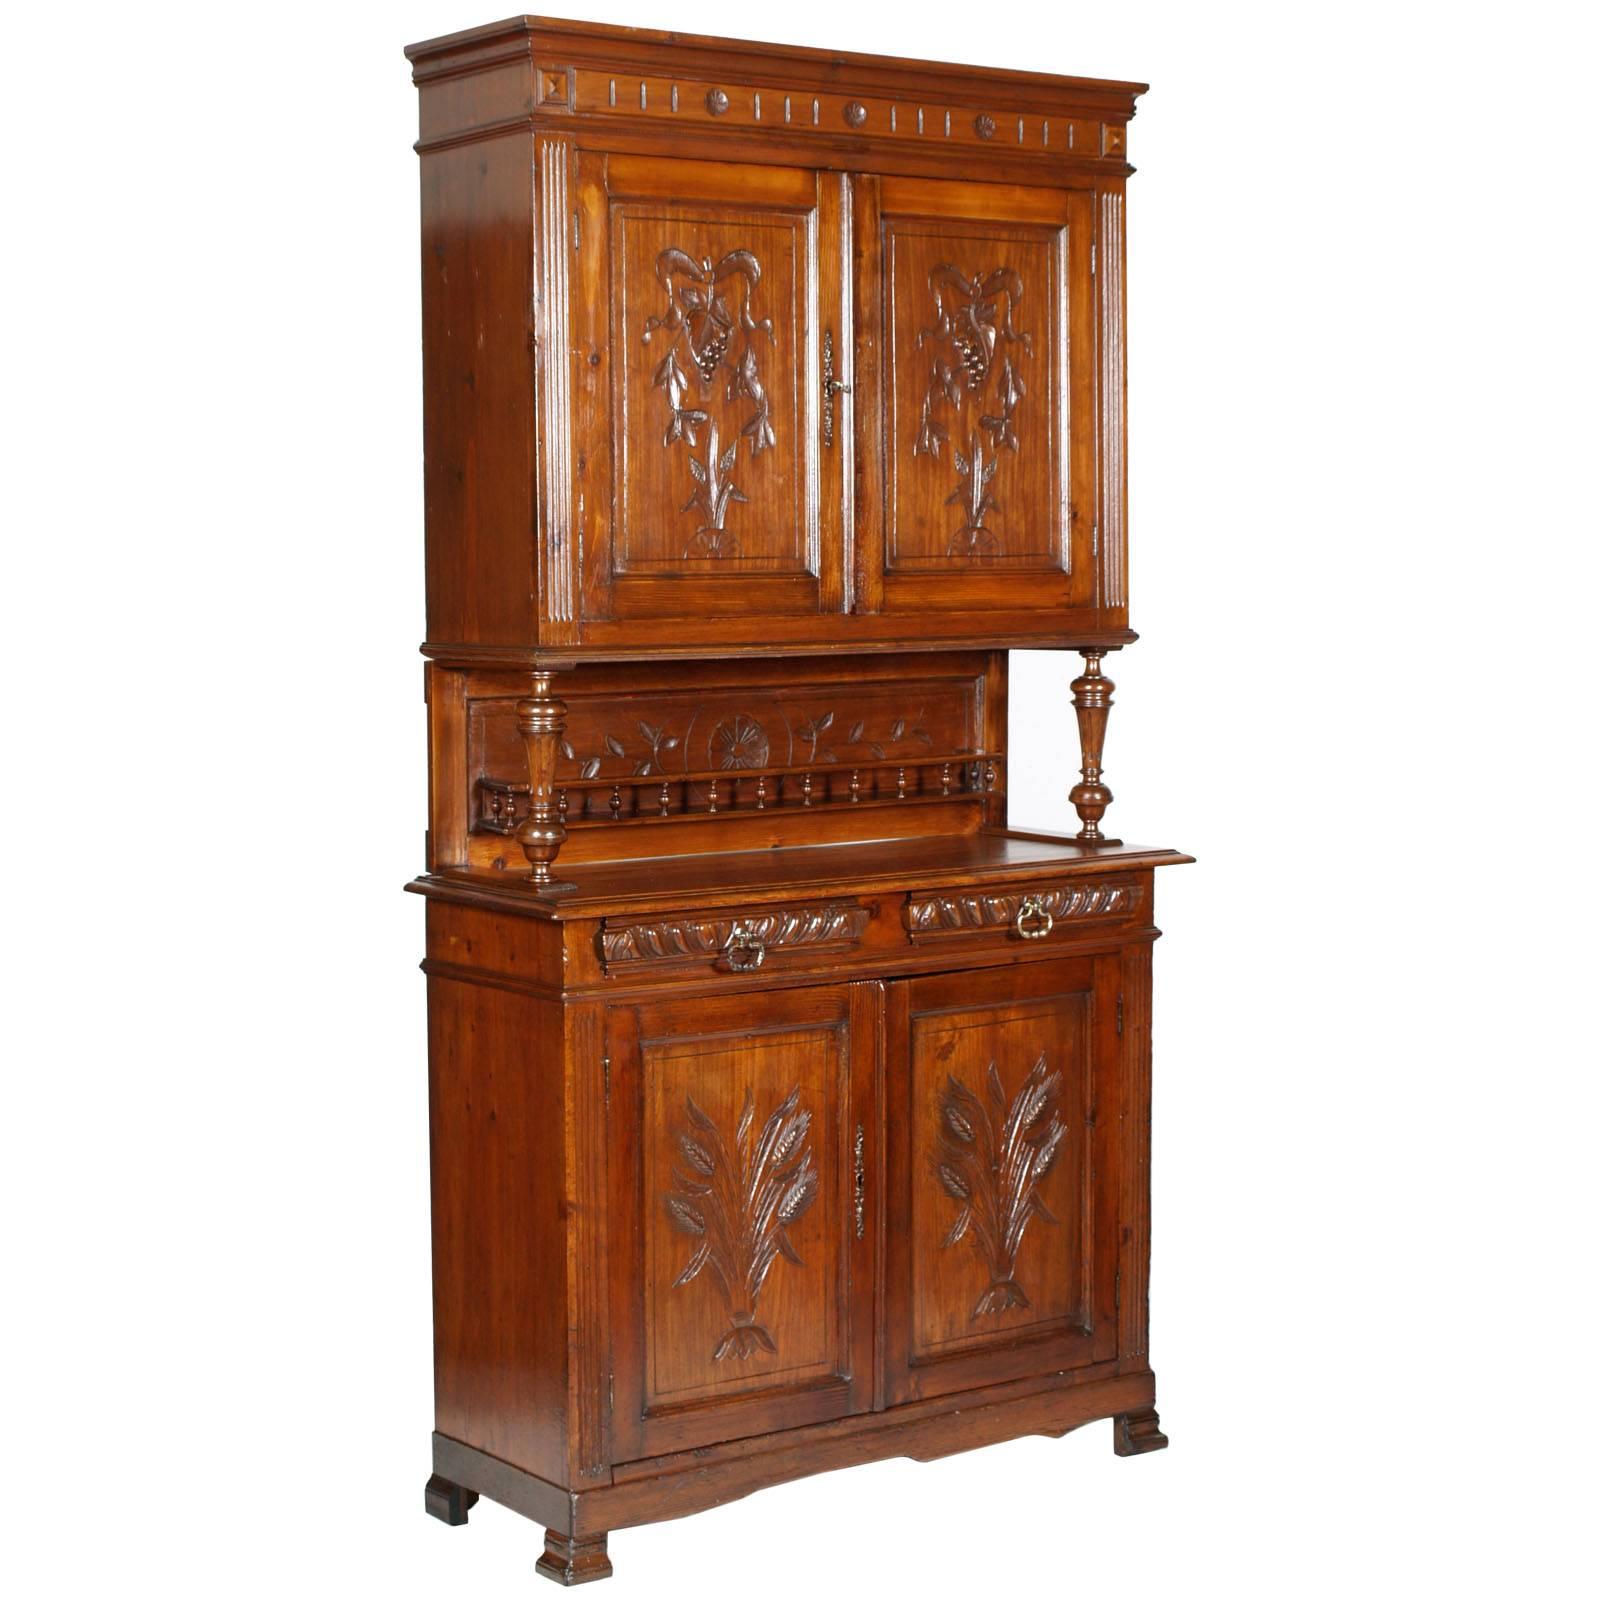 Art Nouveau Provencal Hand-Carved Solid Wood Sideboard Restored and Wax Polished